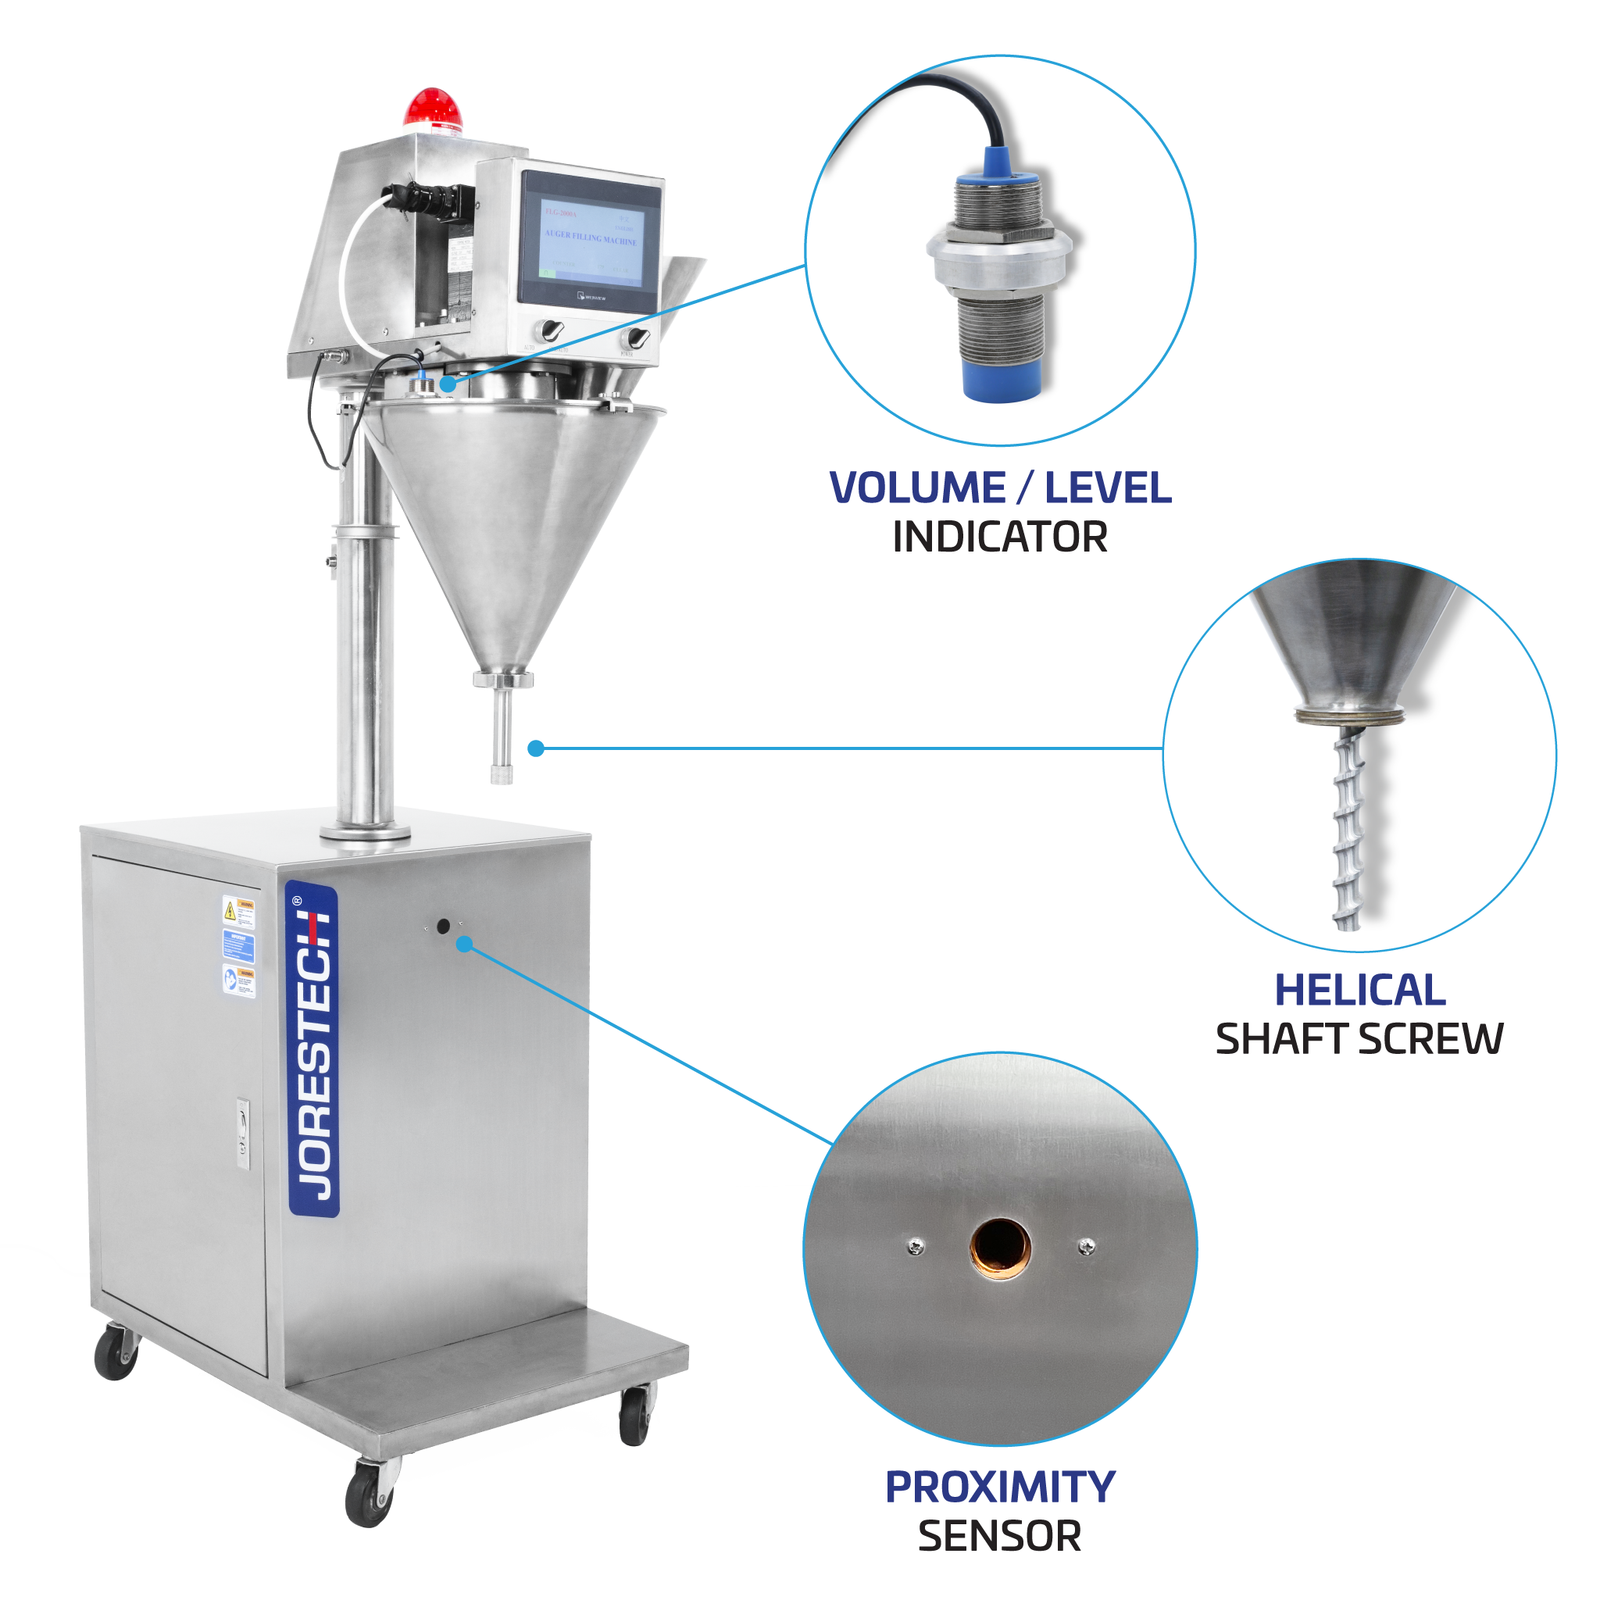 Infographic of an auger-type stainless steel powder dispensing and filling machine. There are three highlighted features which are: “volume level indicator”, “helical shaft screw”, and “proximity sensor”.